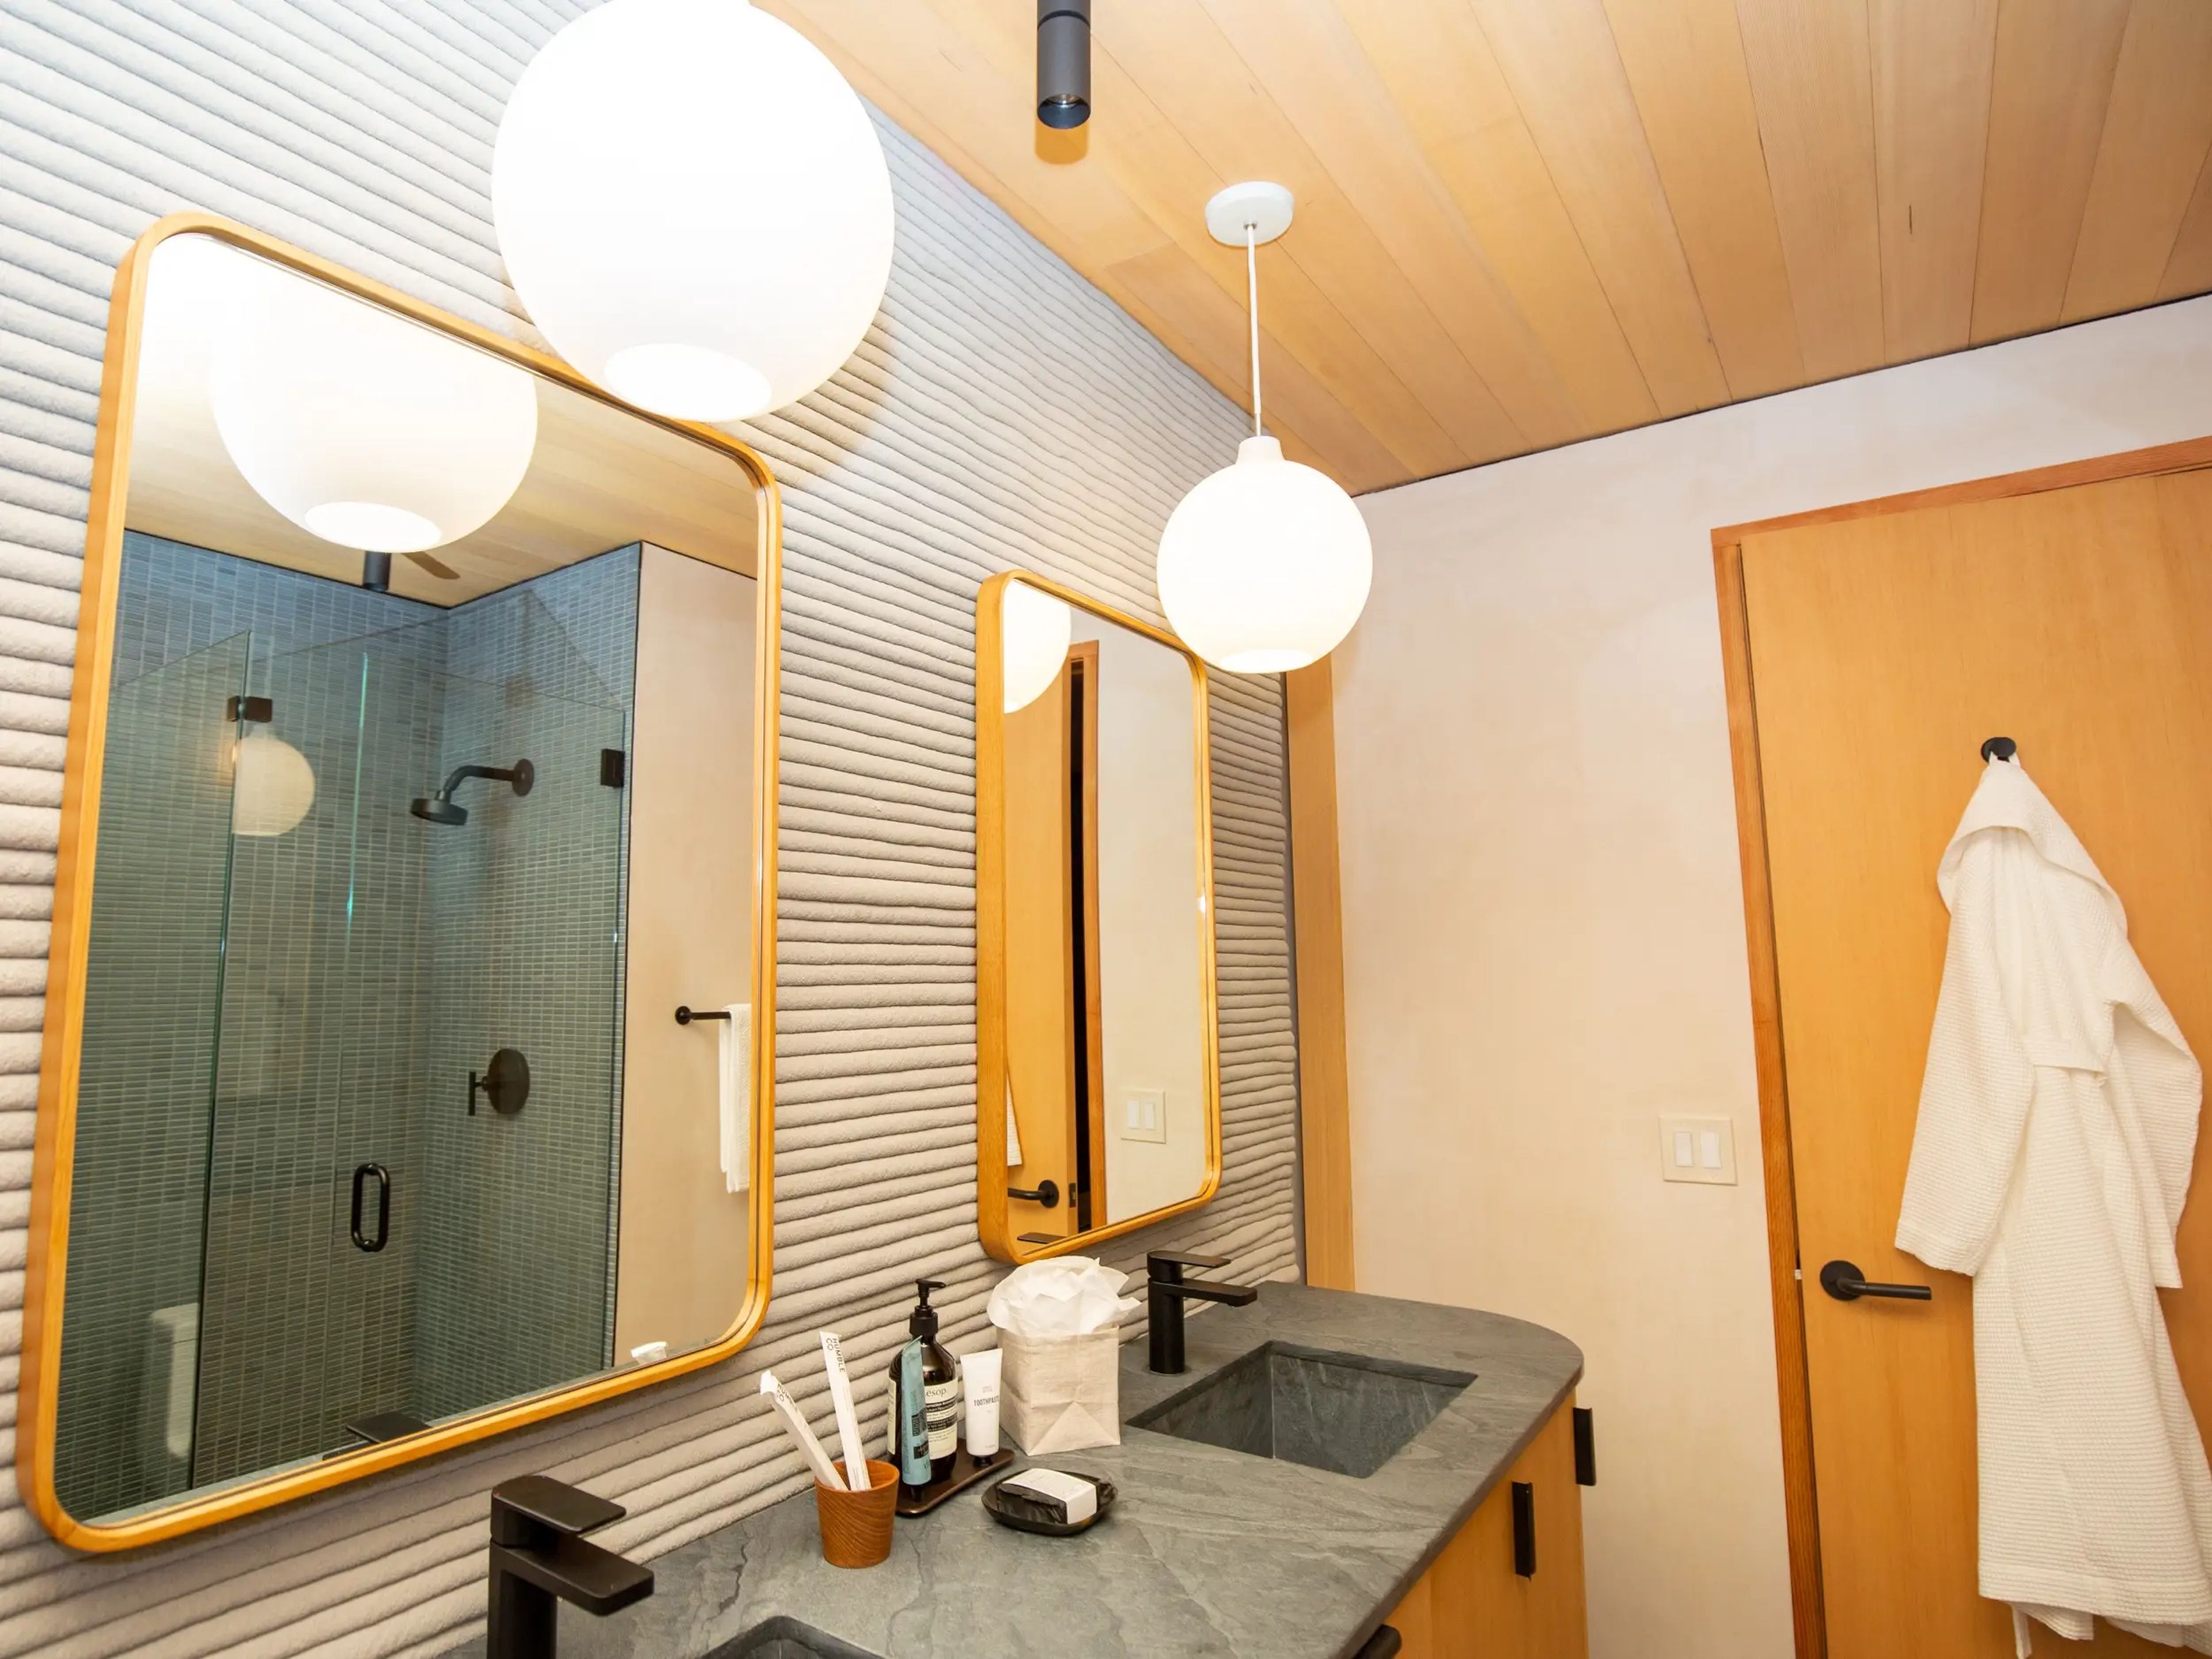 A bathroom with dual sinks, mirrors, and lights. There's a robe hanging on the wall.